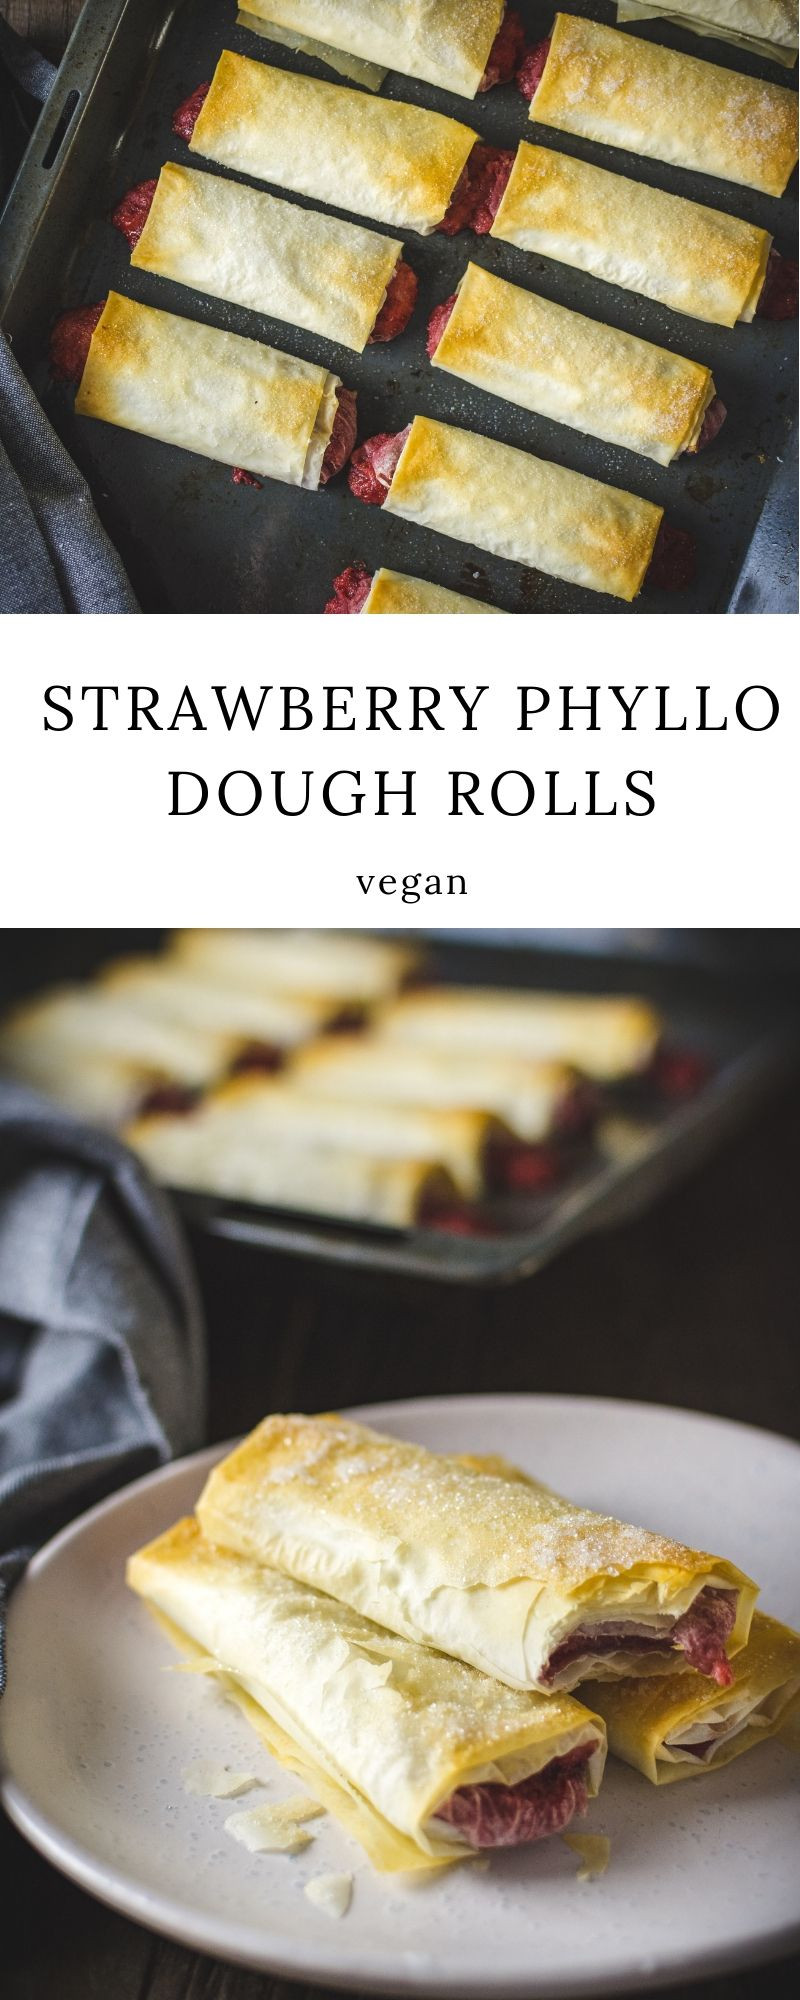 Phyllo Dough Desserts Recipes
 Strawberry phyllo dough rolls is a delicious quick and